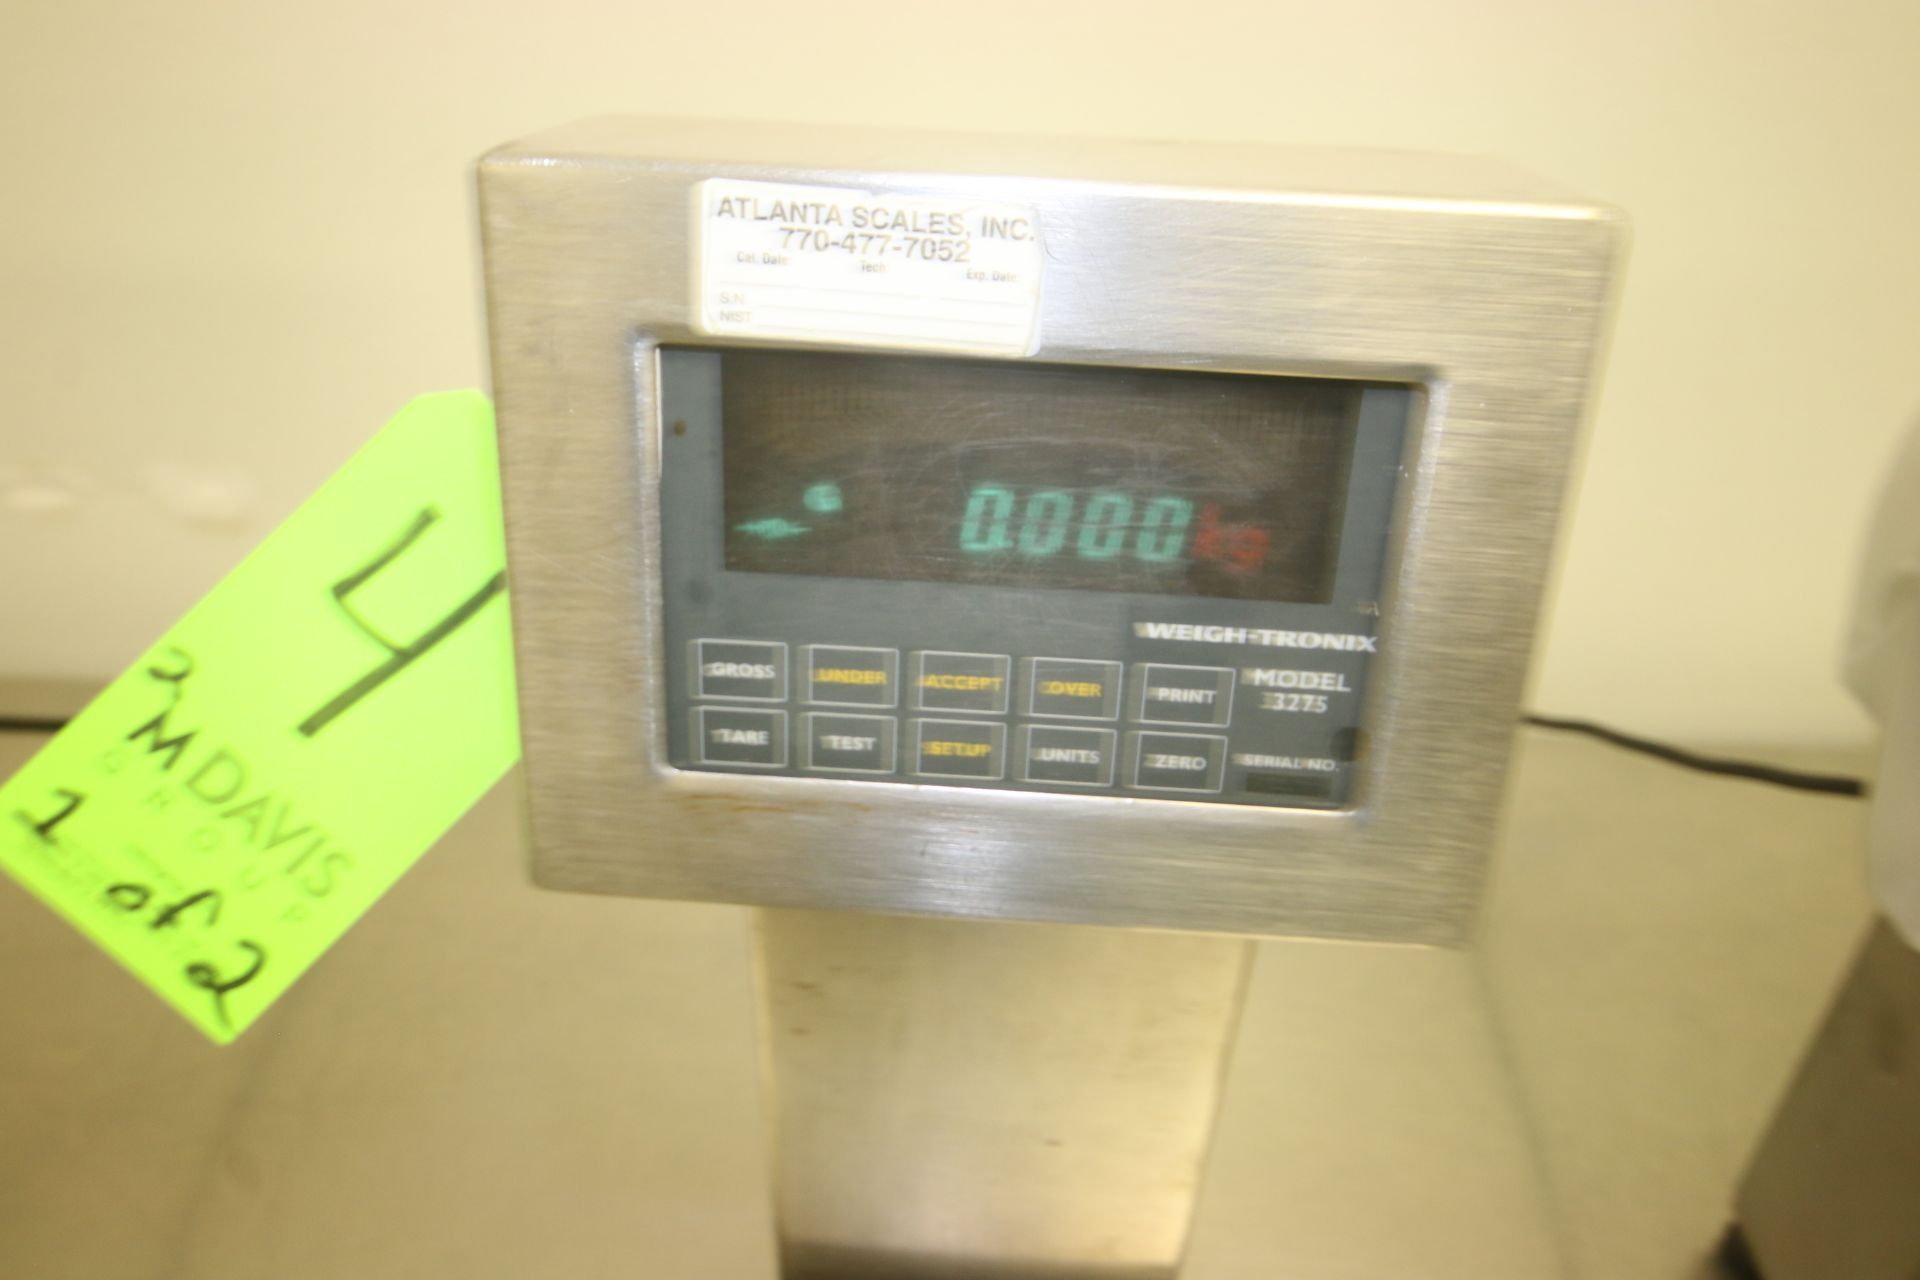 Weigh-Tronix S/S Platform Scales, M/N QC-3265 & 3275, with Aprox. 13-1/2" L x 12" W S/S Platforms, - Image 6 of 6